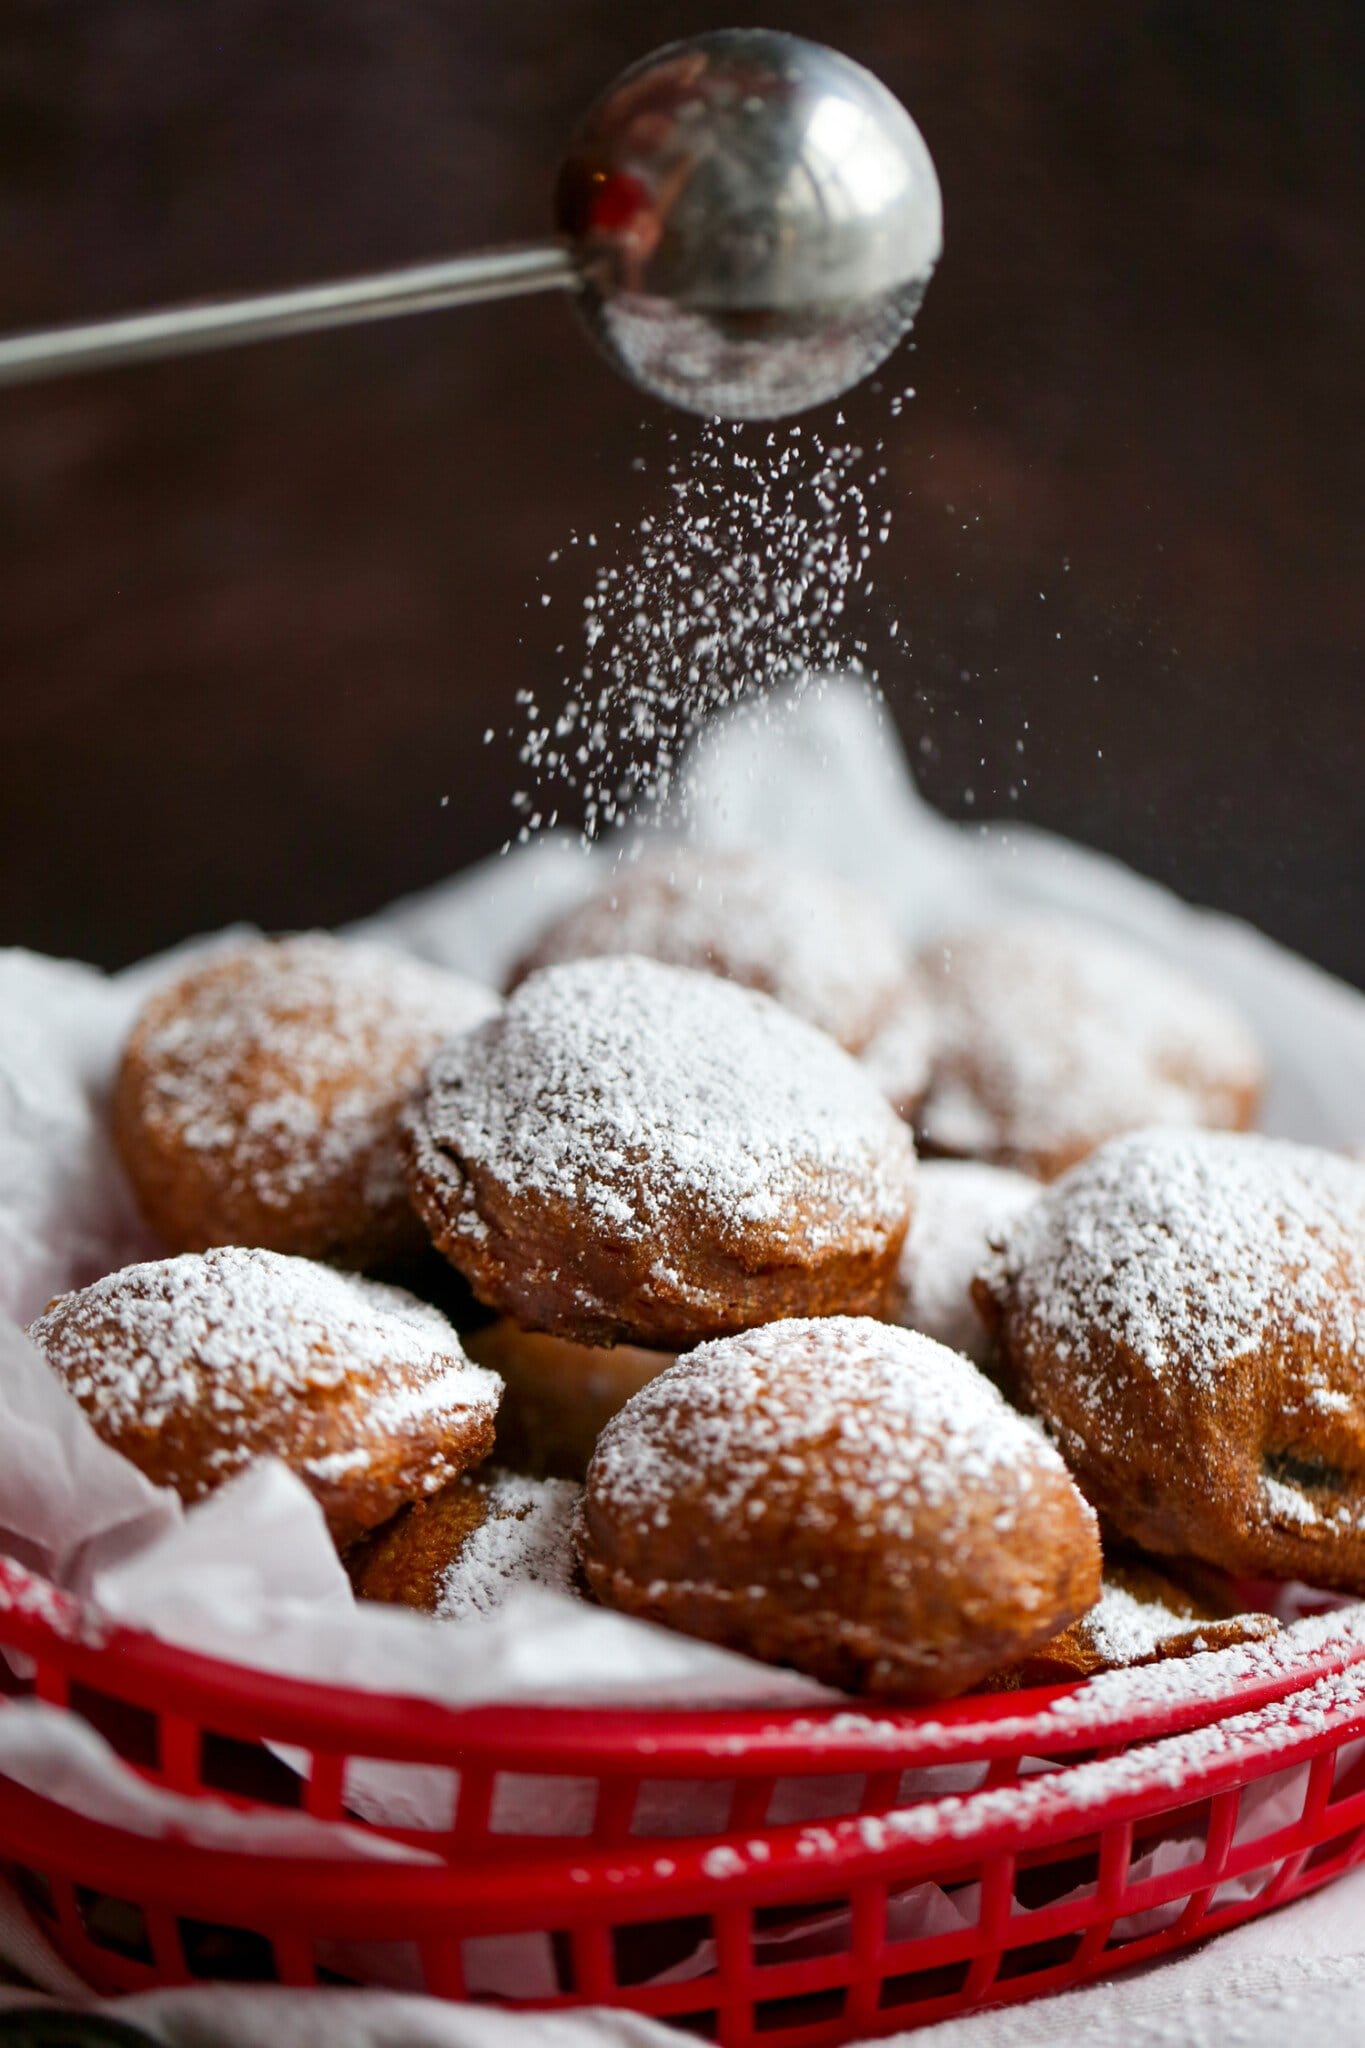 How To Make Easy Deep Fried Oreos - Cookies and Cups